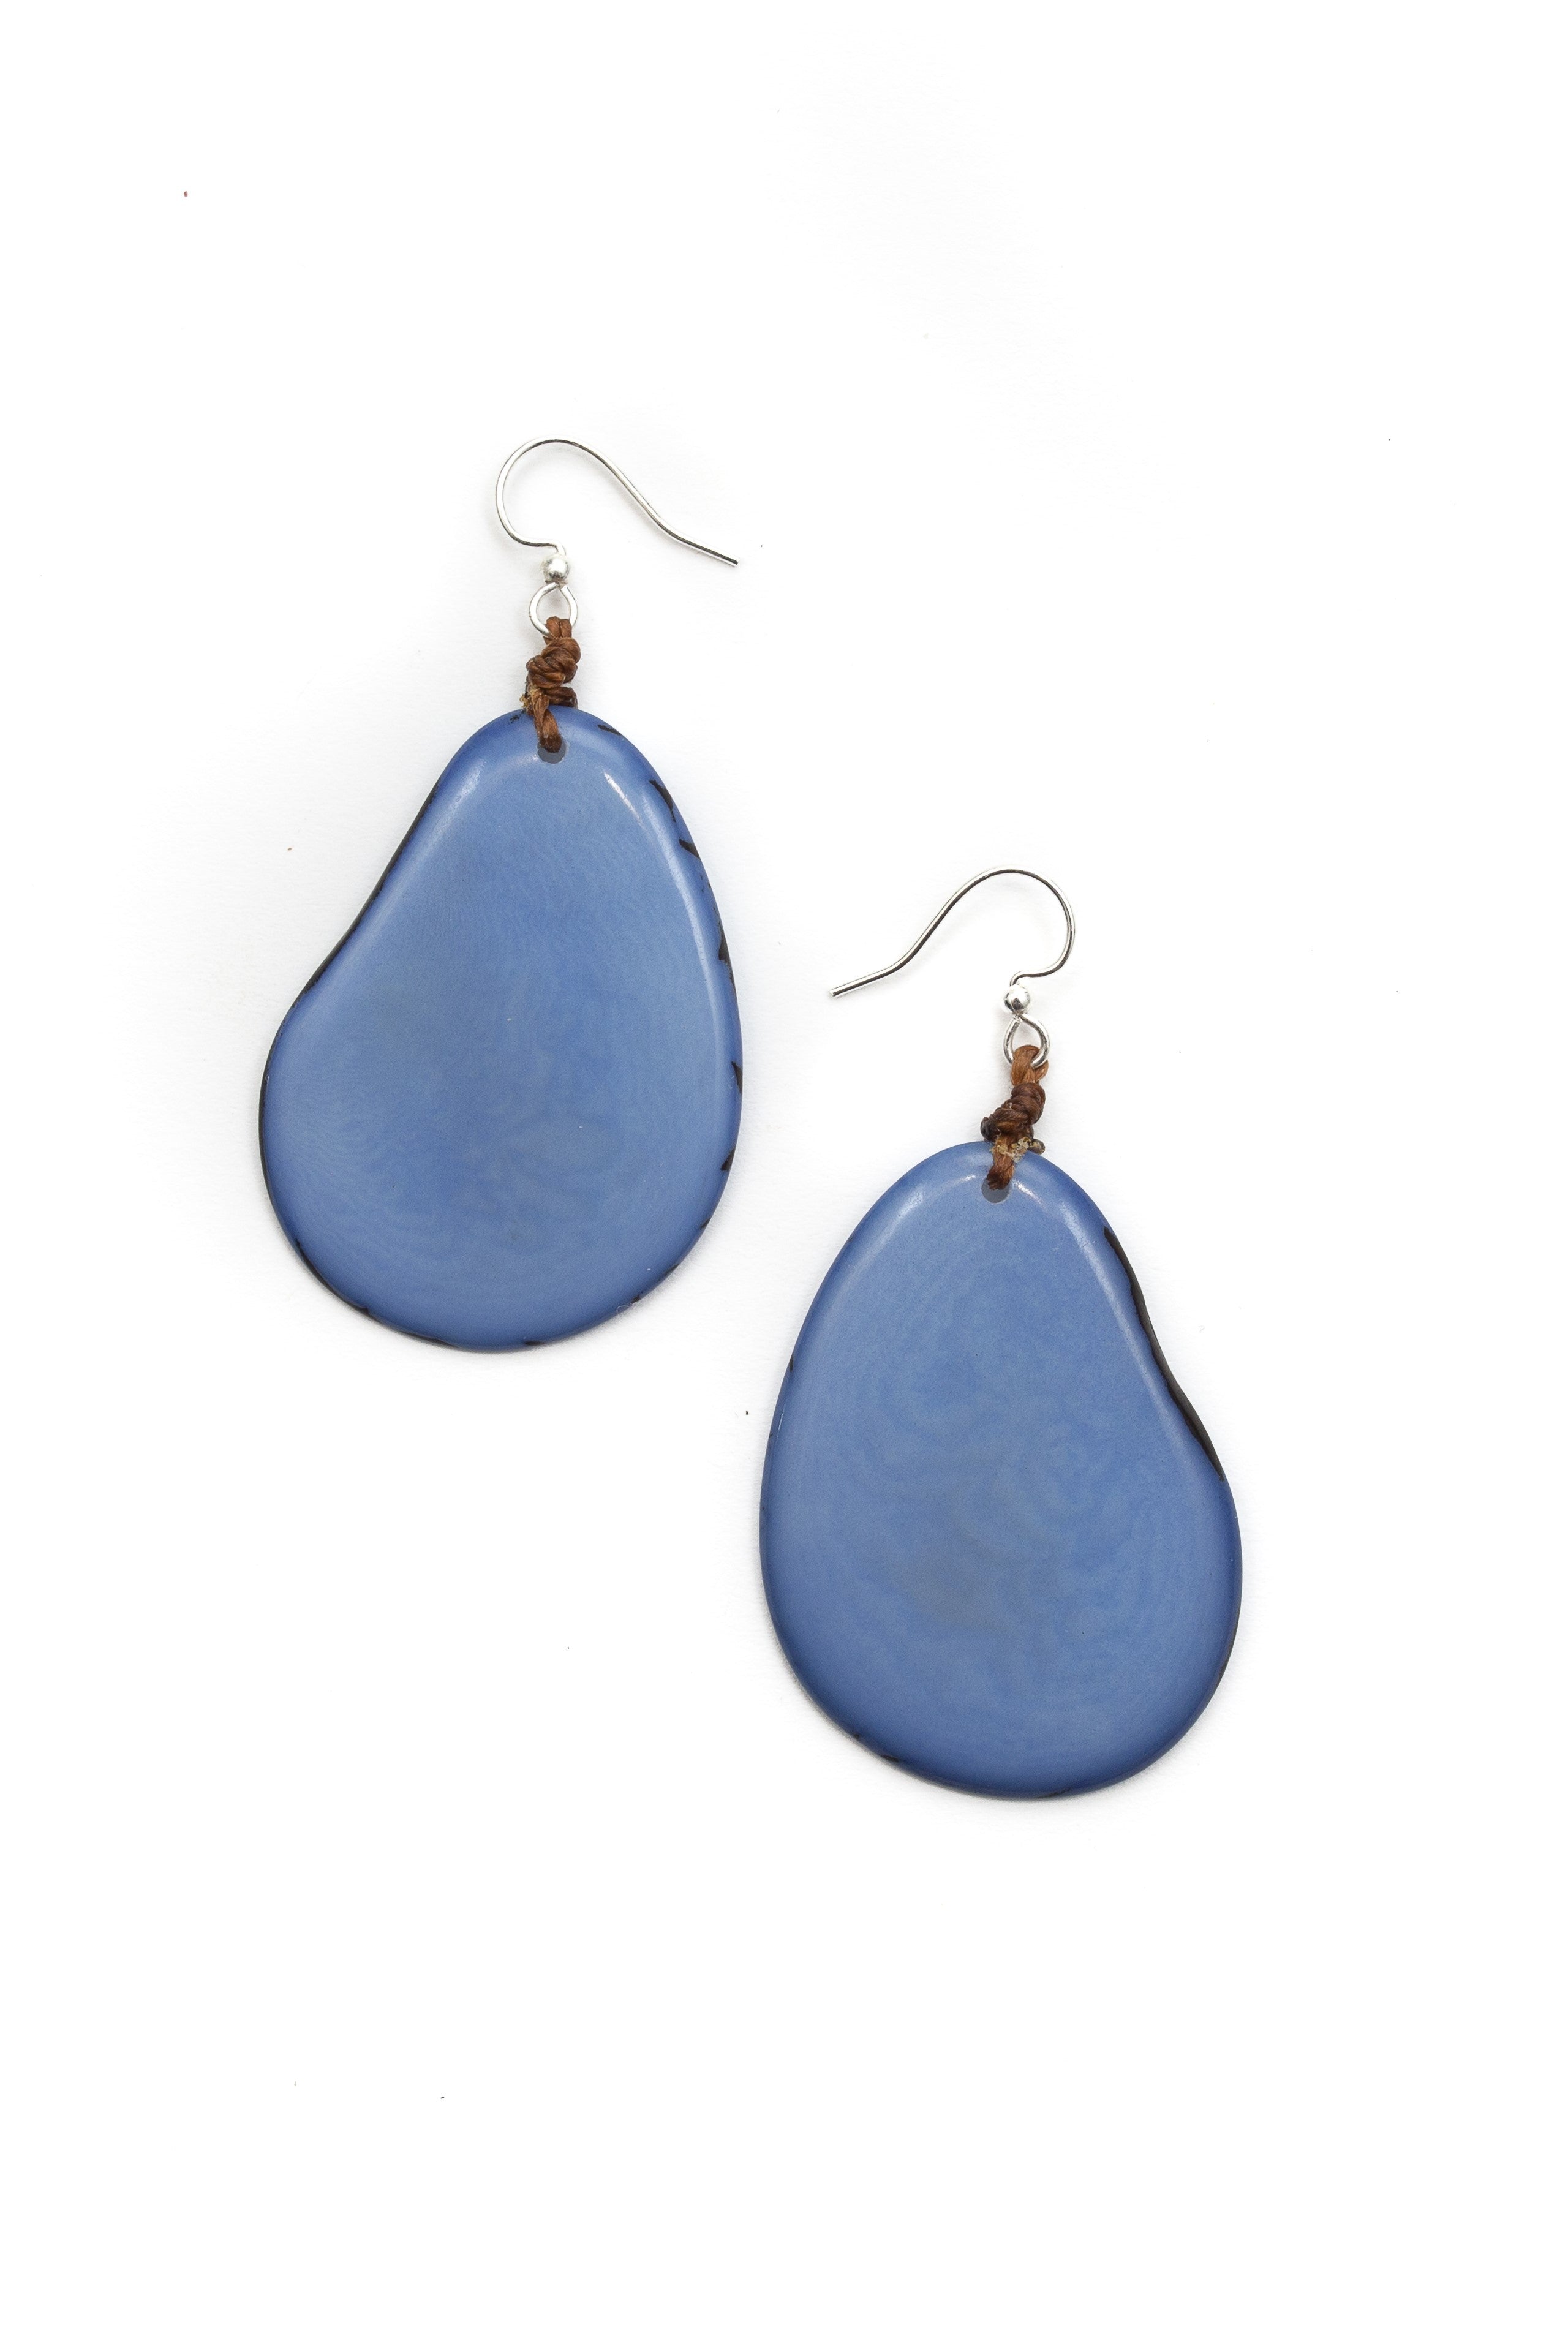 Organic Tague Jewelry (1E250) Drop earrings made from organic tagua nut slices in Blue